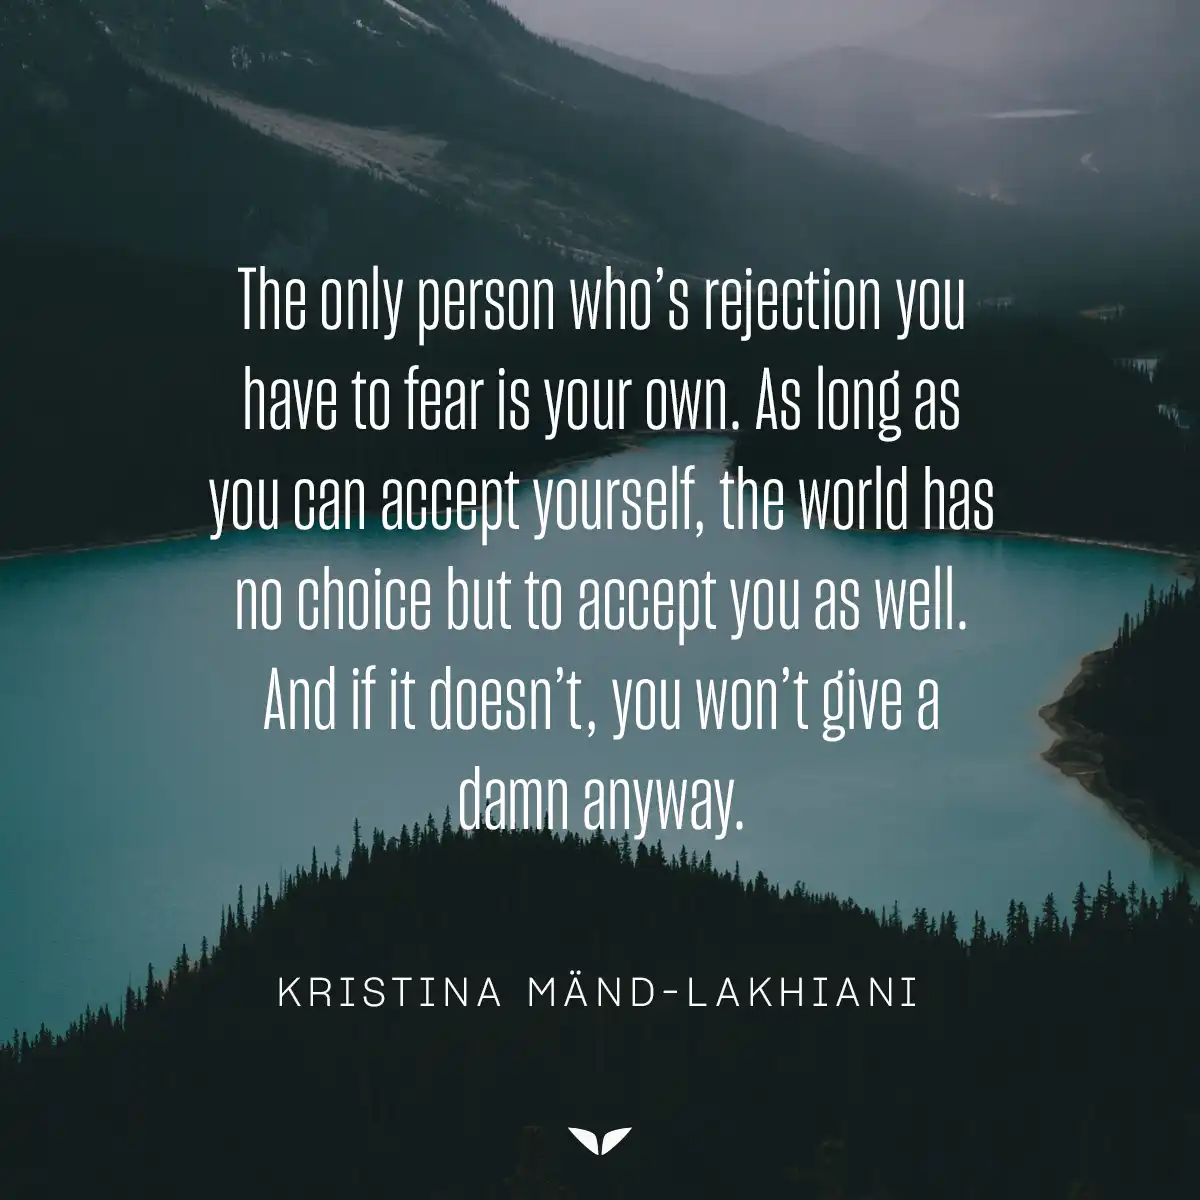 Kristina Mänd-Lakhiani perfectly imperfect quotes on rejection